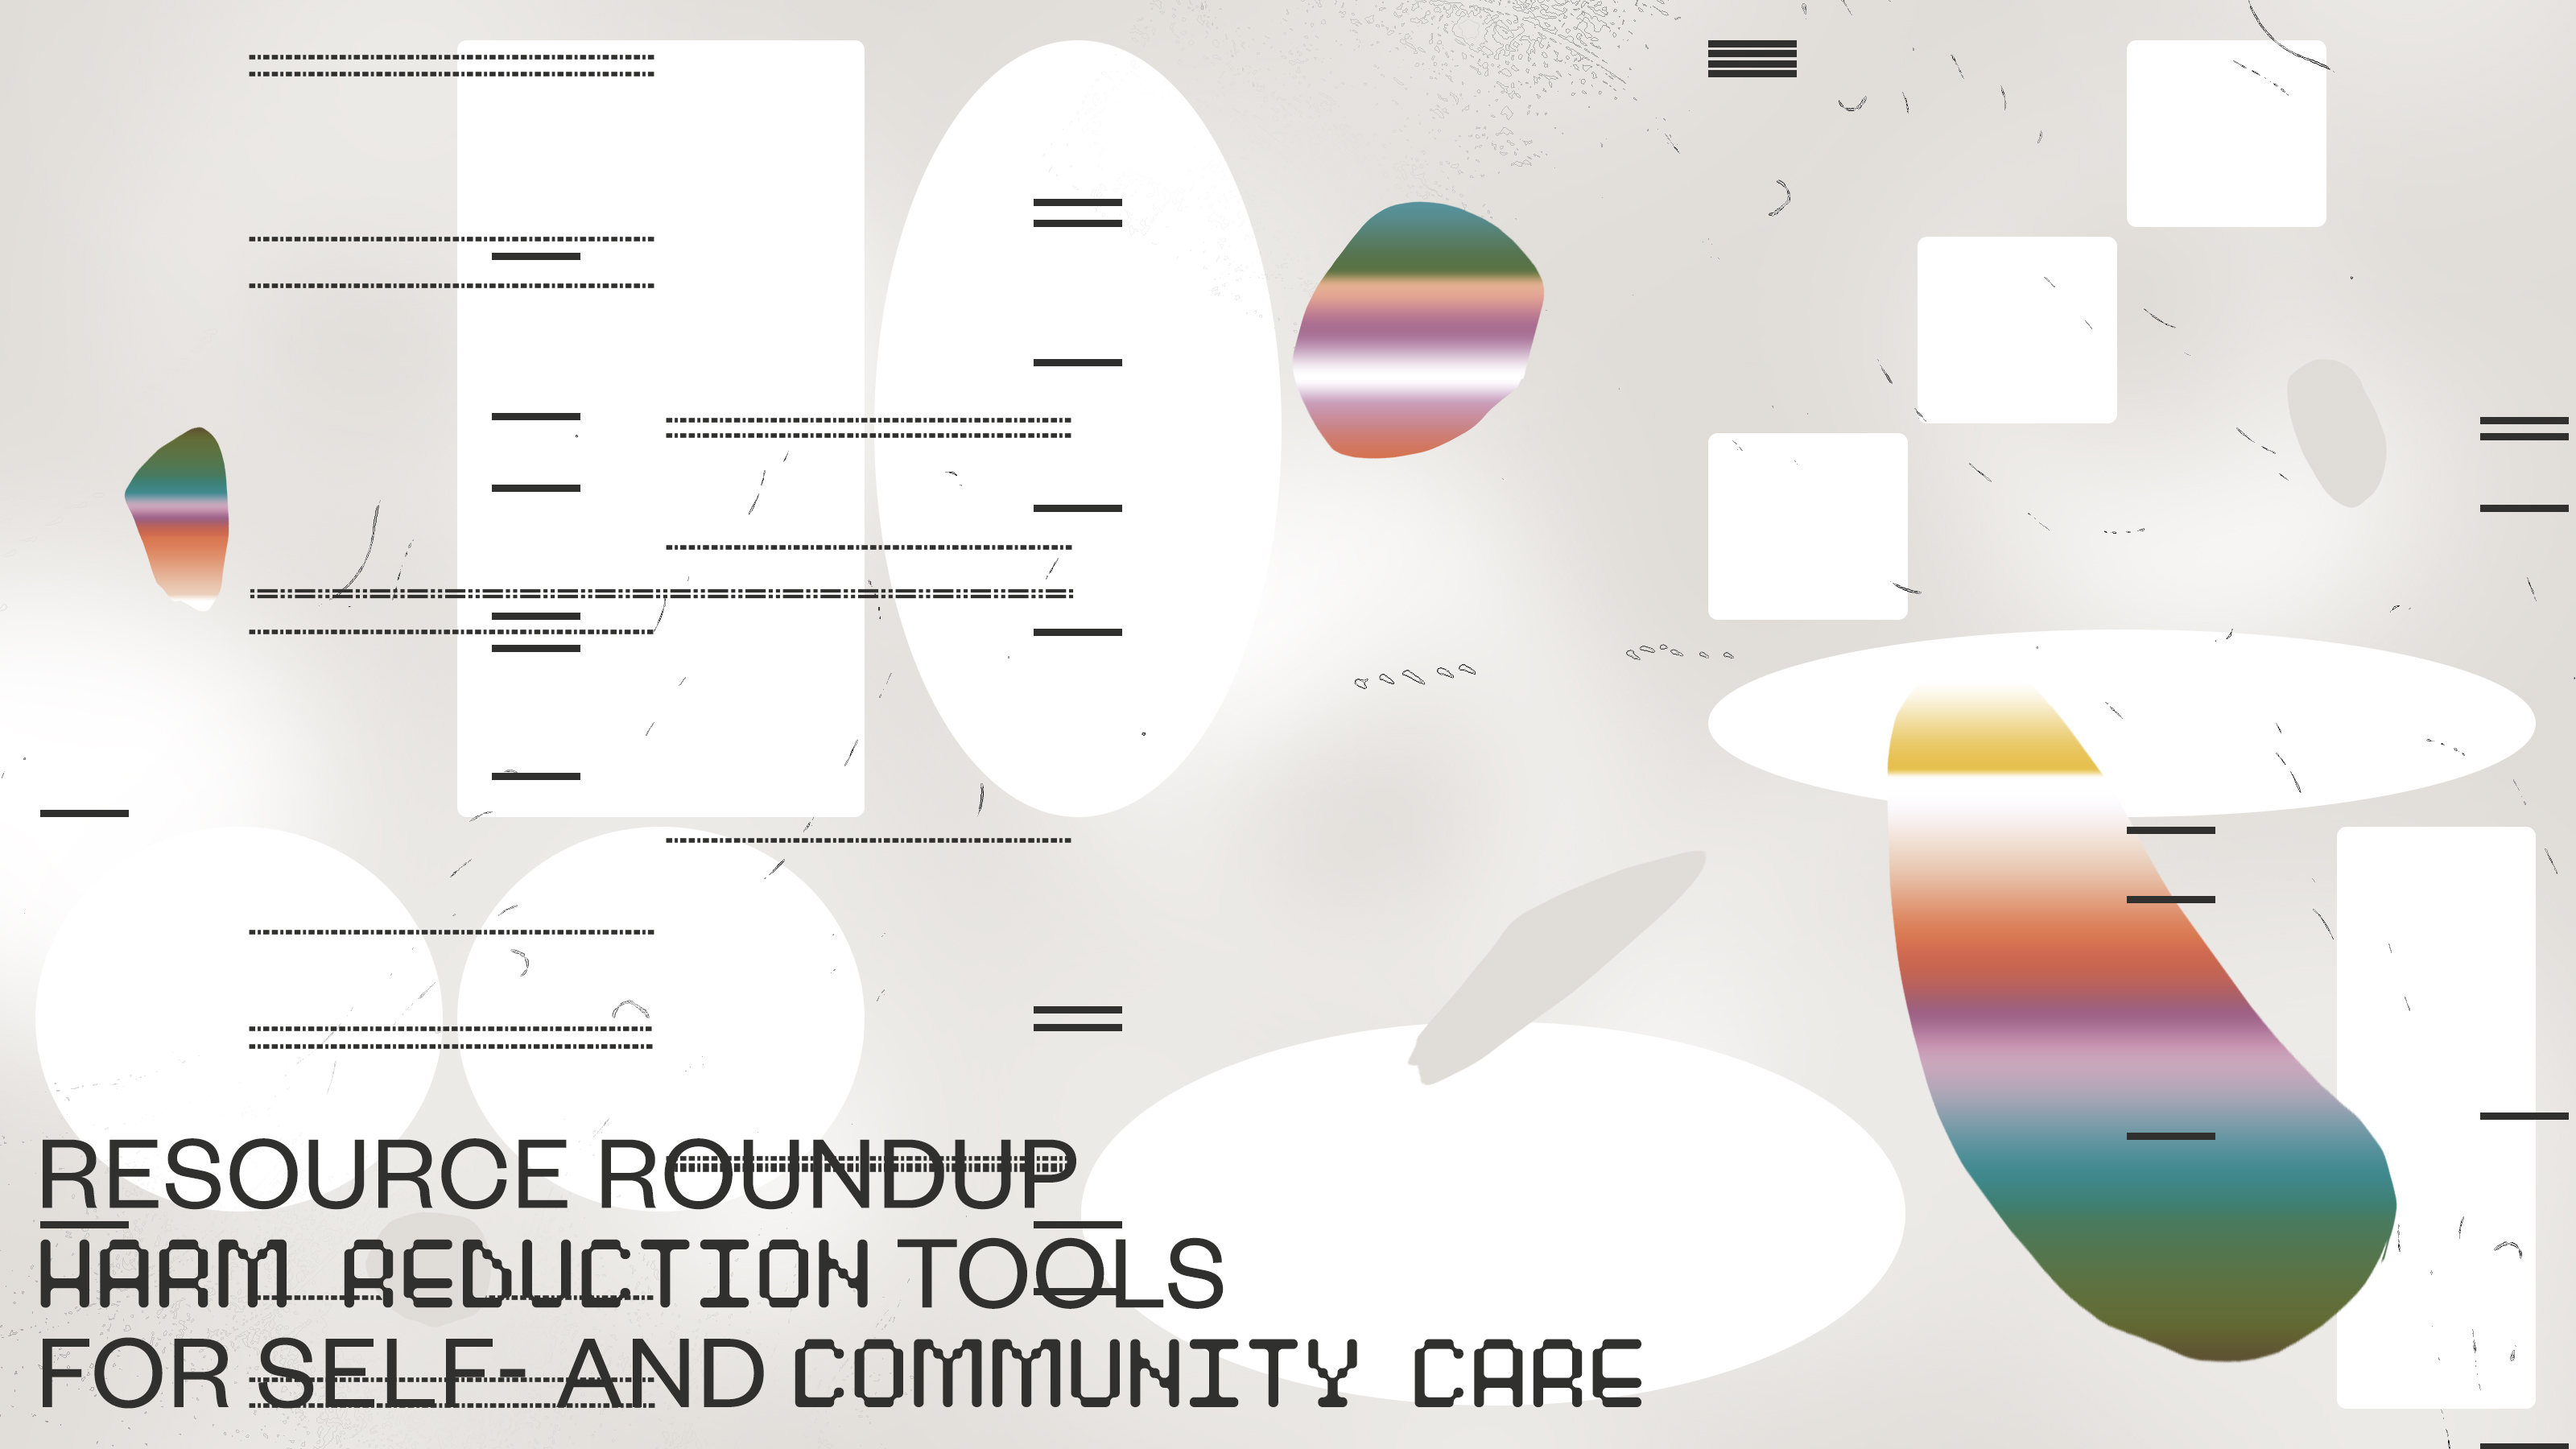 Resource Roundup: Harm Reduction Tools for Self- and Community Care